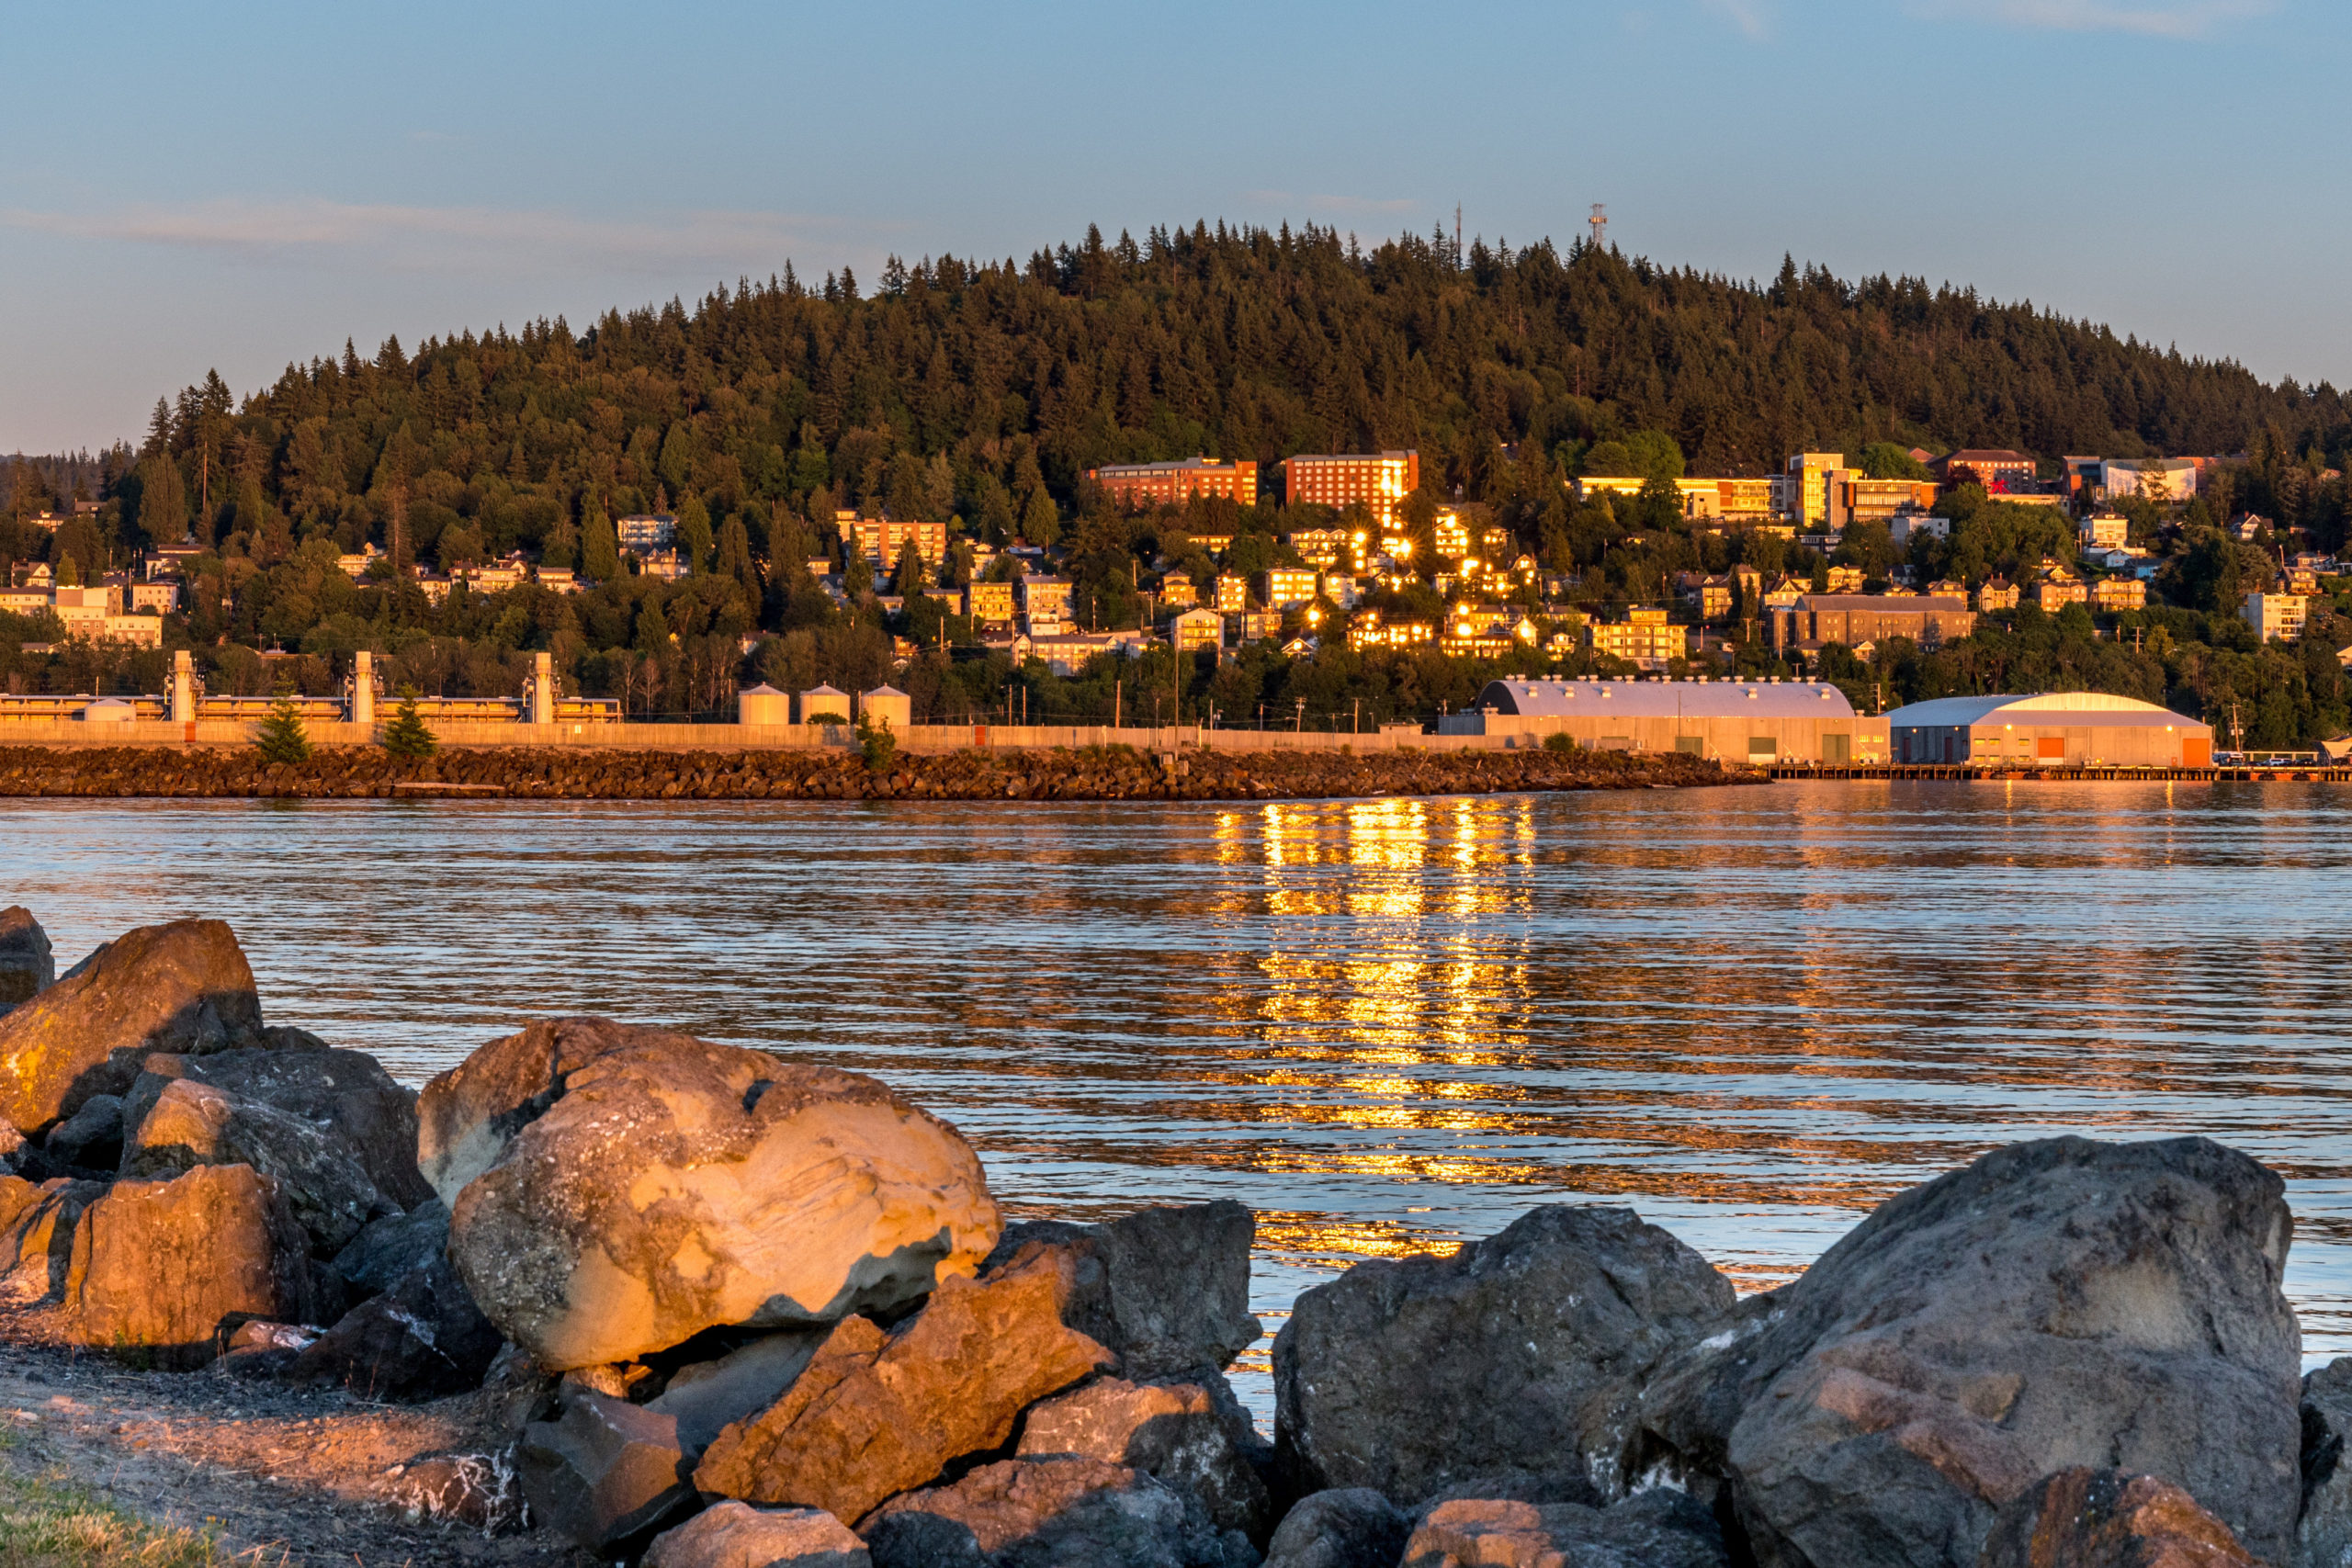 Bellingham, Washington as seen from over the water at sunset